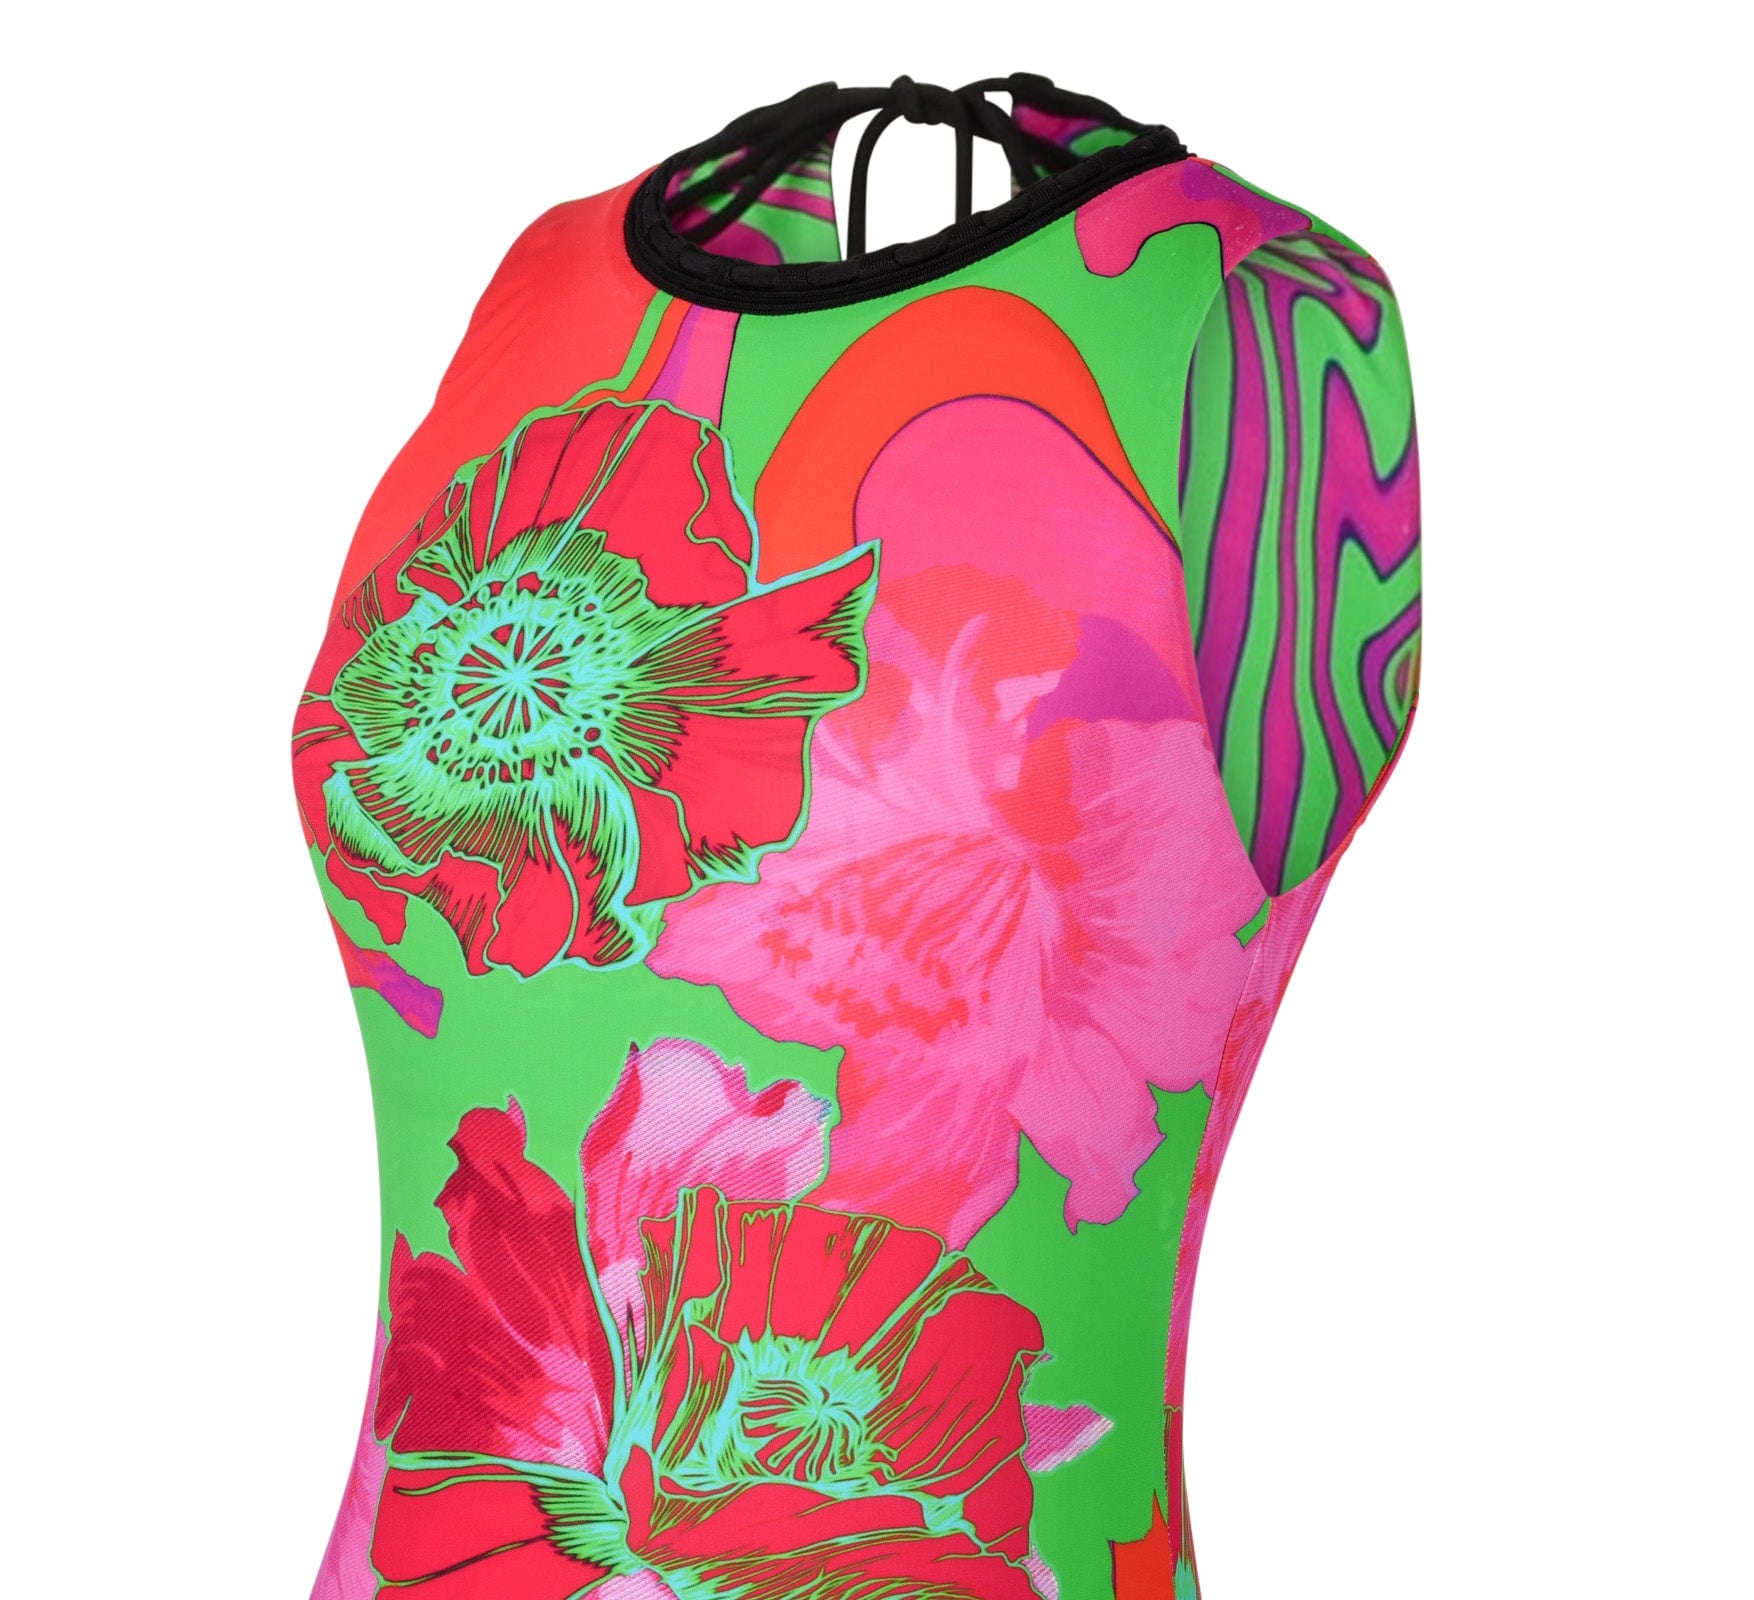 Roberto Cavalli Dress Floor Length Exotic Floral Print Tropical Colours 8 - mightychic